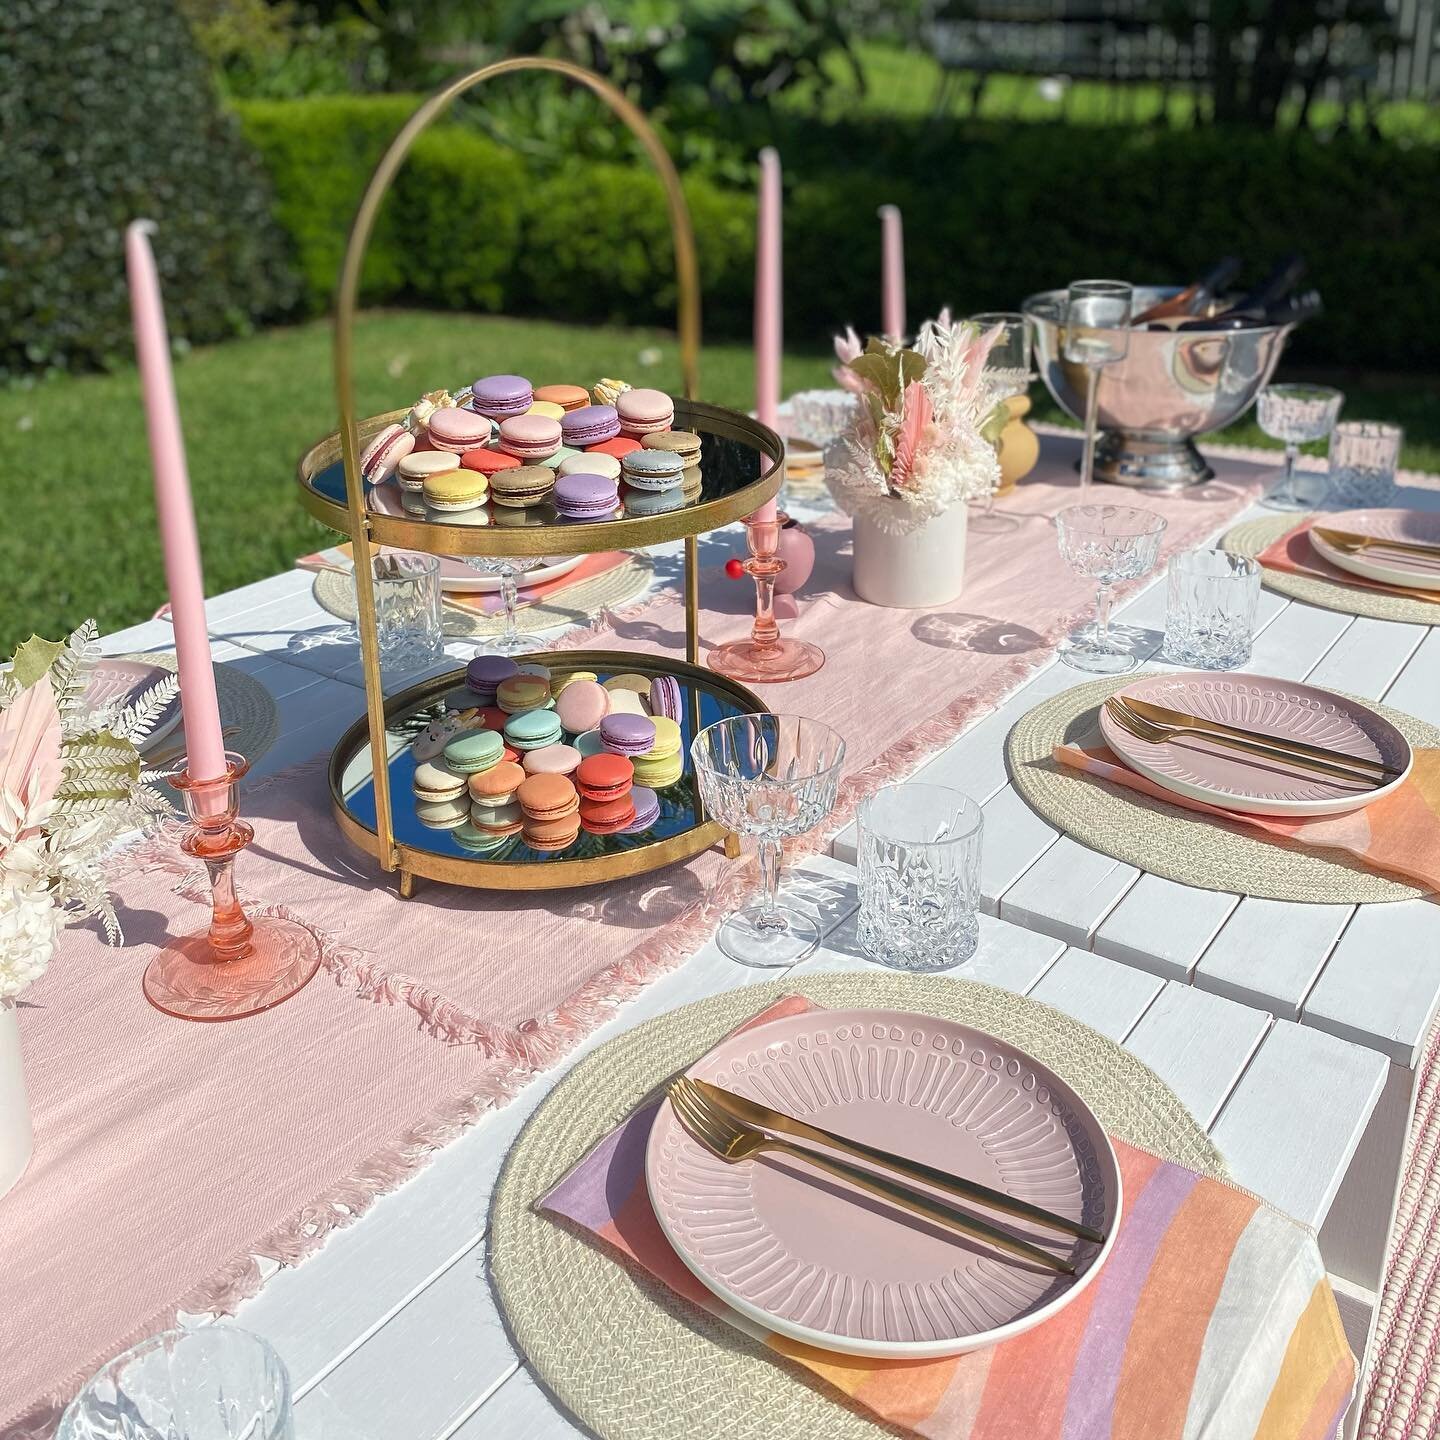 Sweet Candyland. 🍭

Looking for a fun way to celebrate? It's the perfect time of year for a luxury picnic! We create amazing picnic experiences across Lake Macquarie, Newcastle, and the Hunter Valley.

Enquiries: hello@luxelakeside.com.au 

LL x

🏷